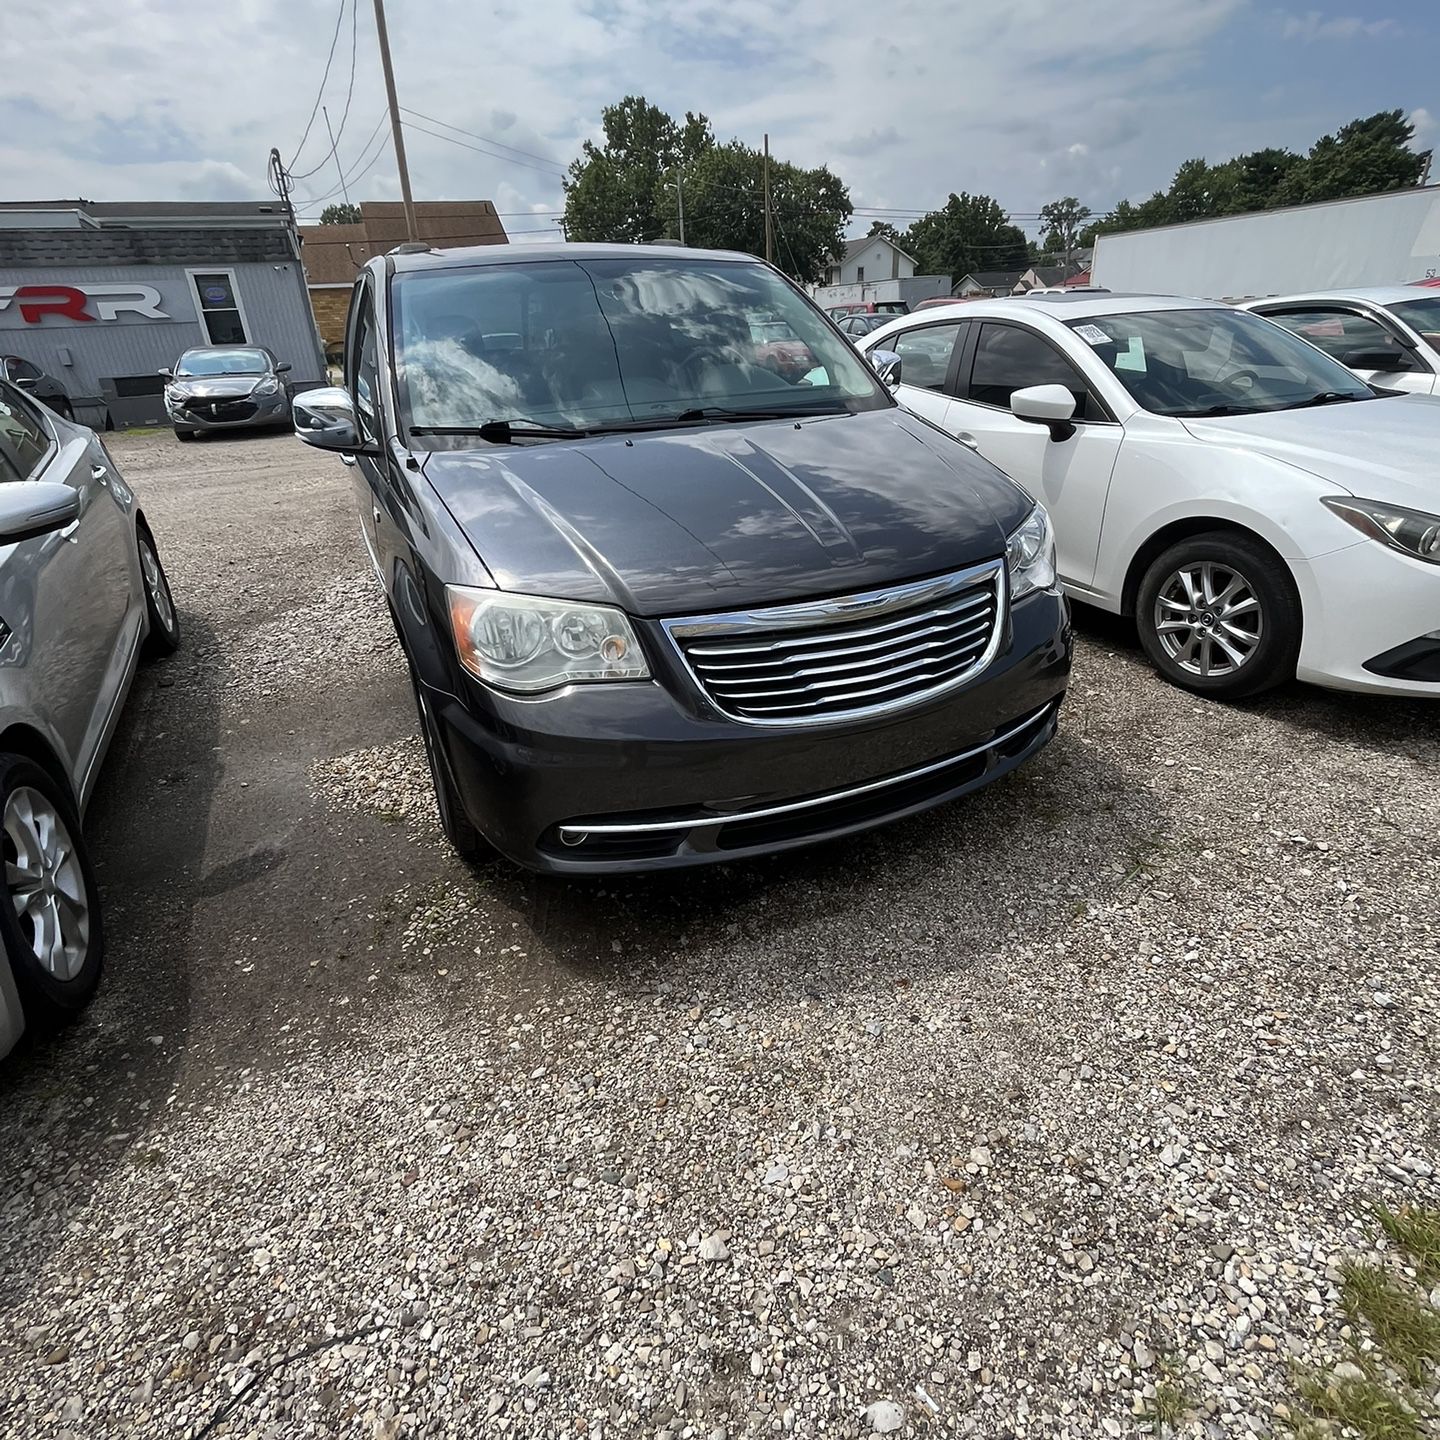 2014 Chrysler Town And Country